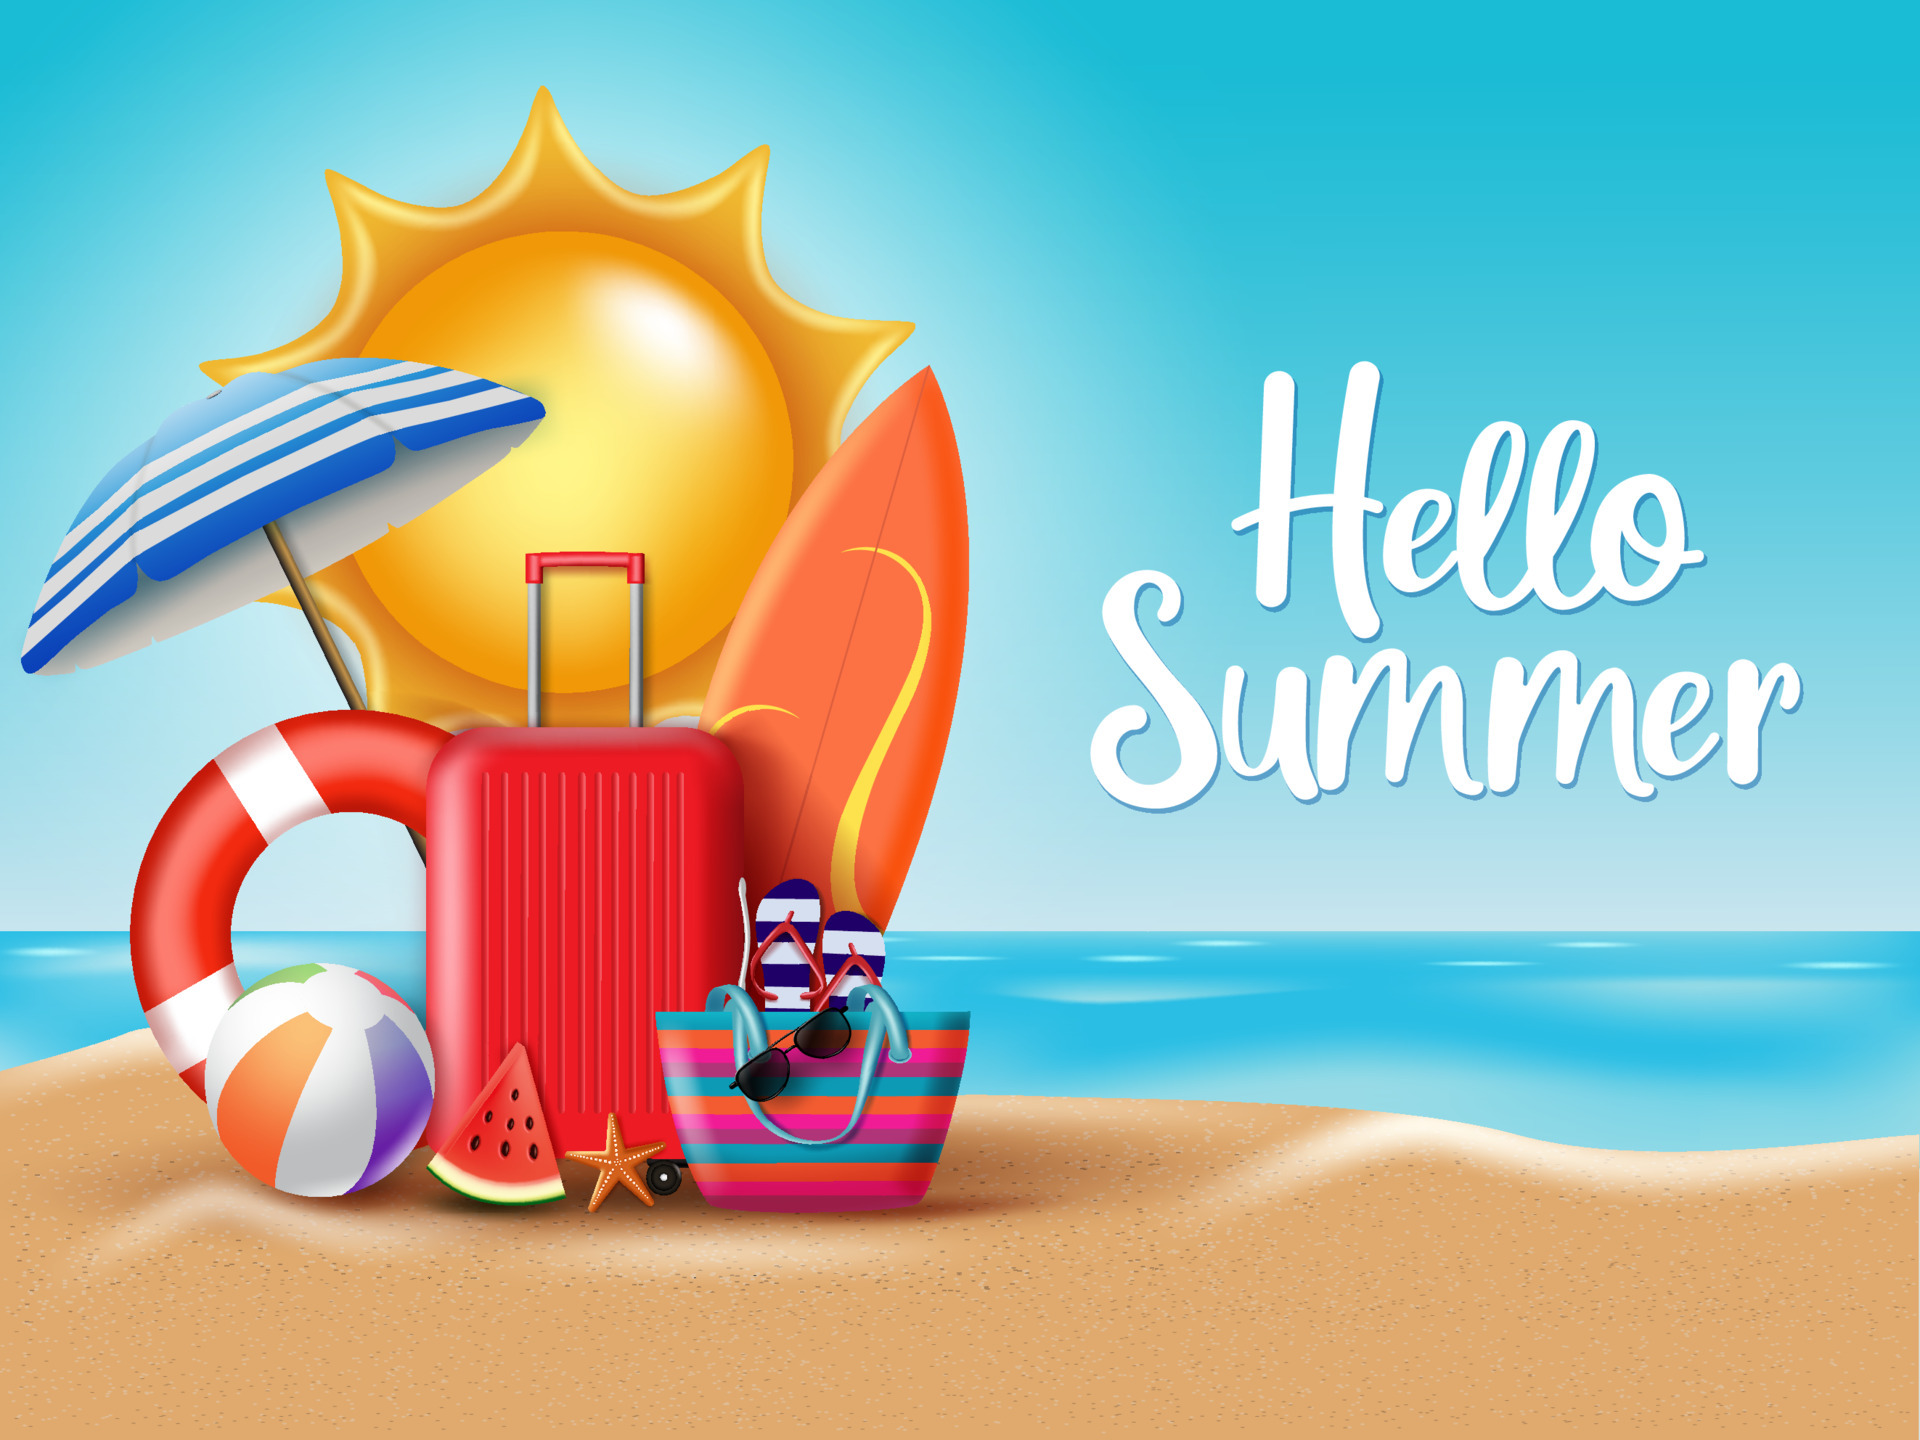 Summer vector design. Hello summer greeting text in beach with colorful beach elements of sun, luggage, ball, bag, watermelon, umbrella and surfing board in sand. Vector illustration